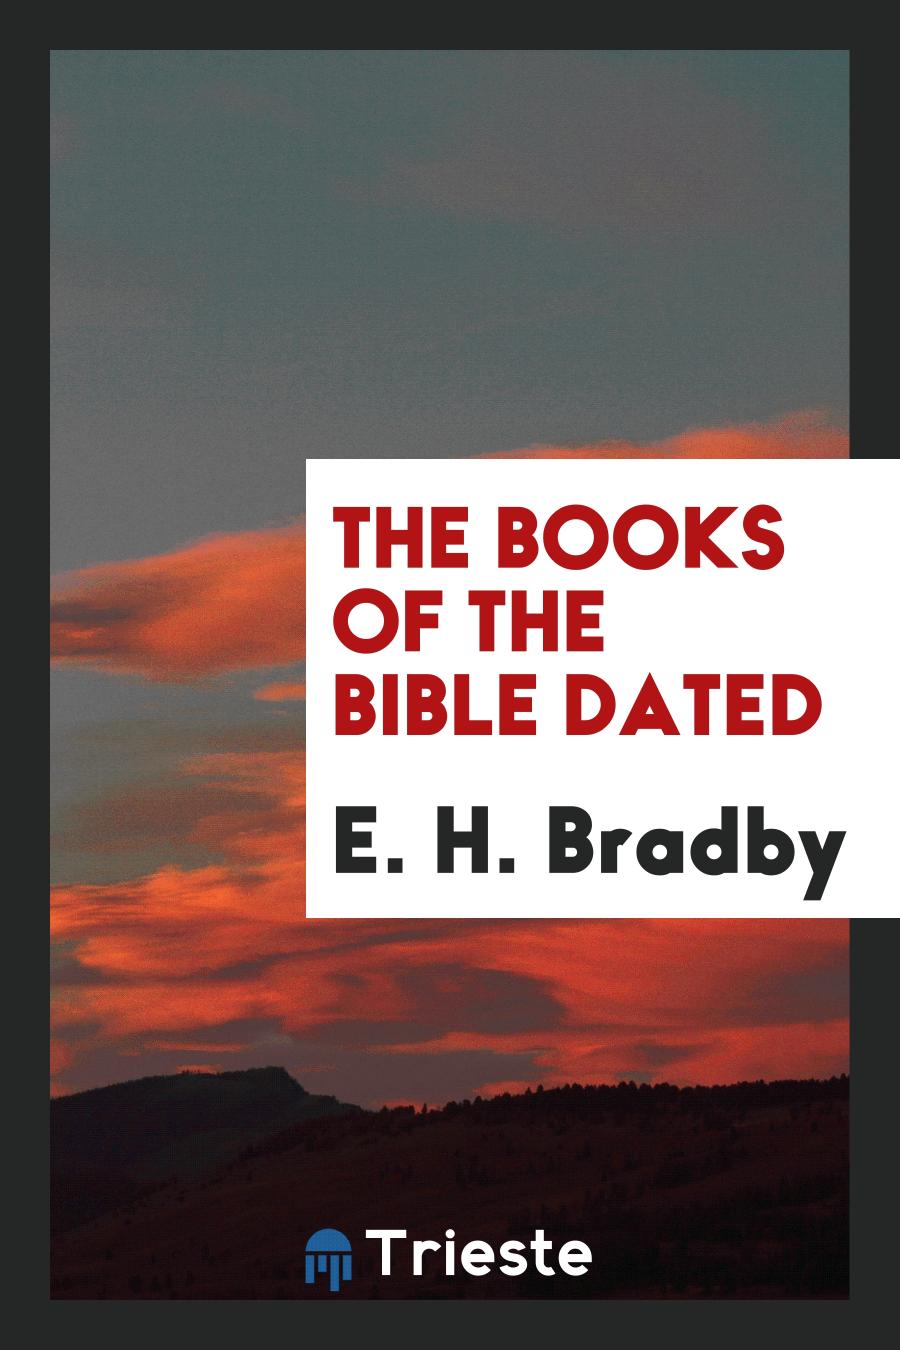 The Books of the bible dated